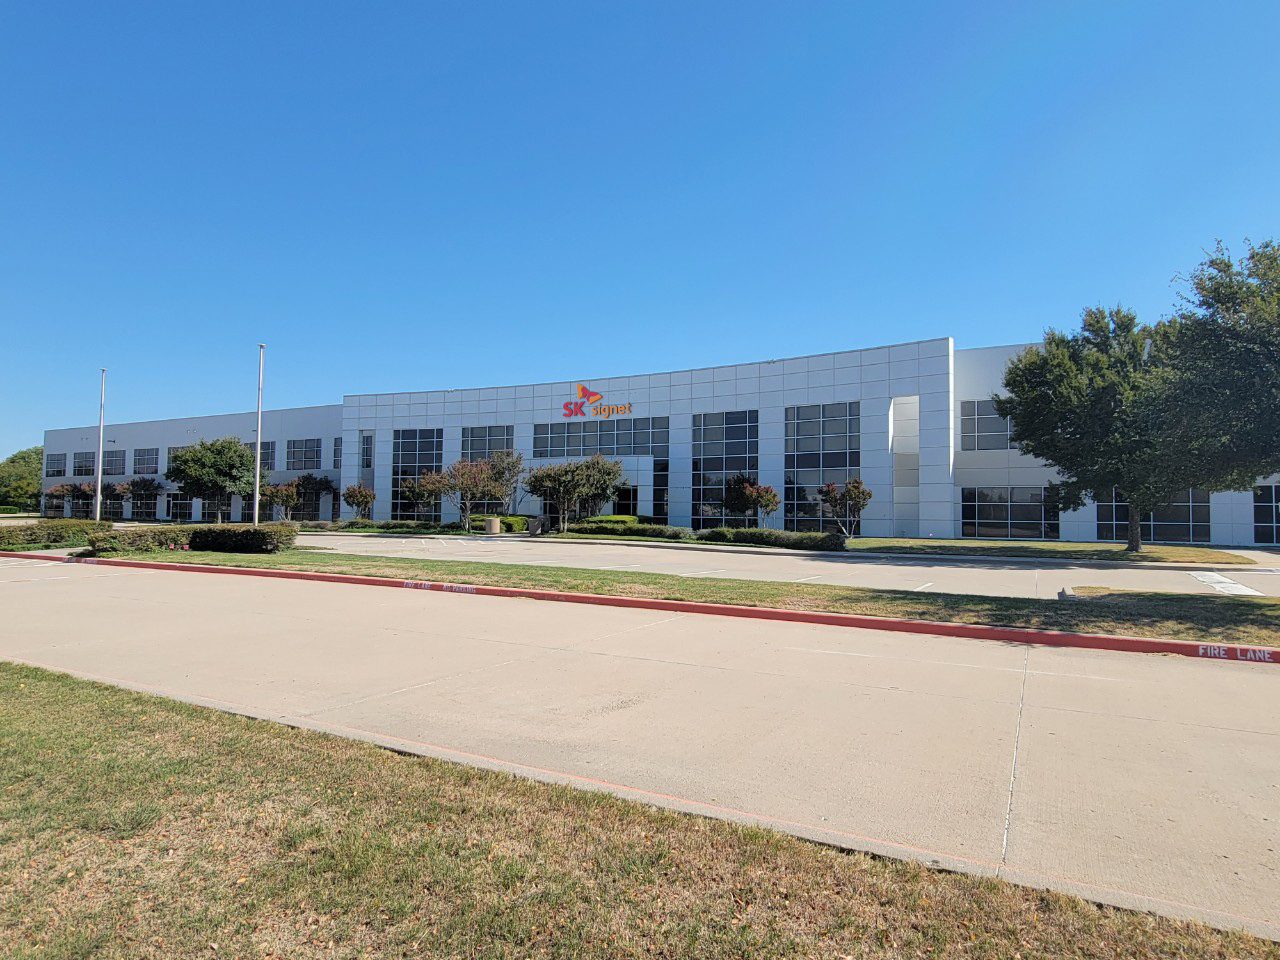 SK Signet's new US manufacturing facility is located in Plano, Texas. (SK Signet)